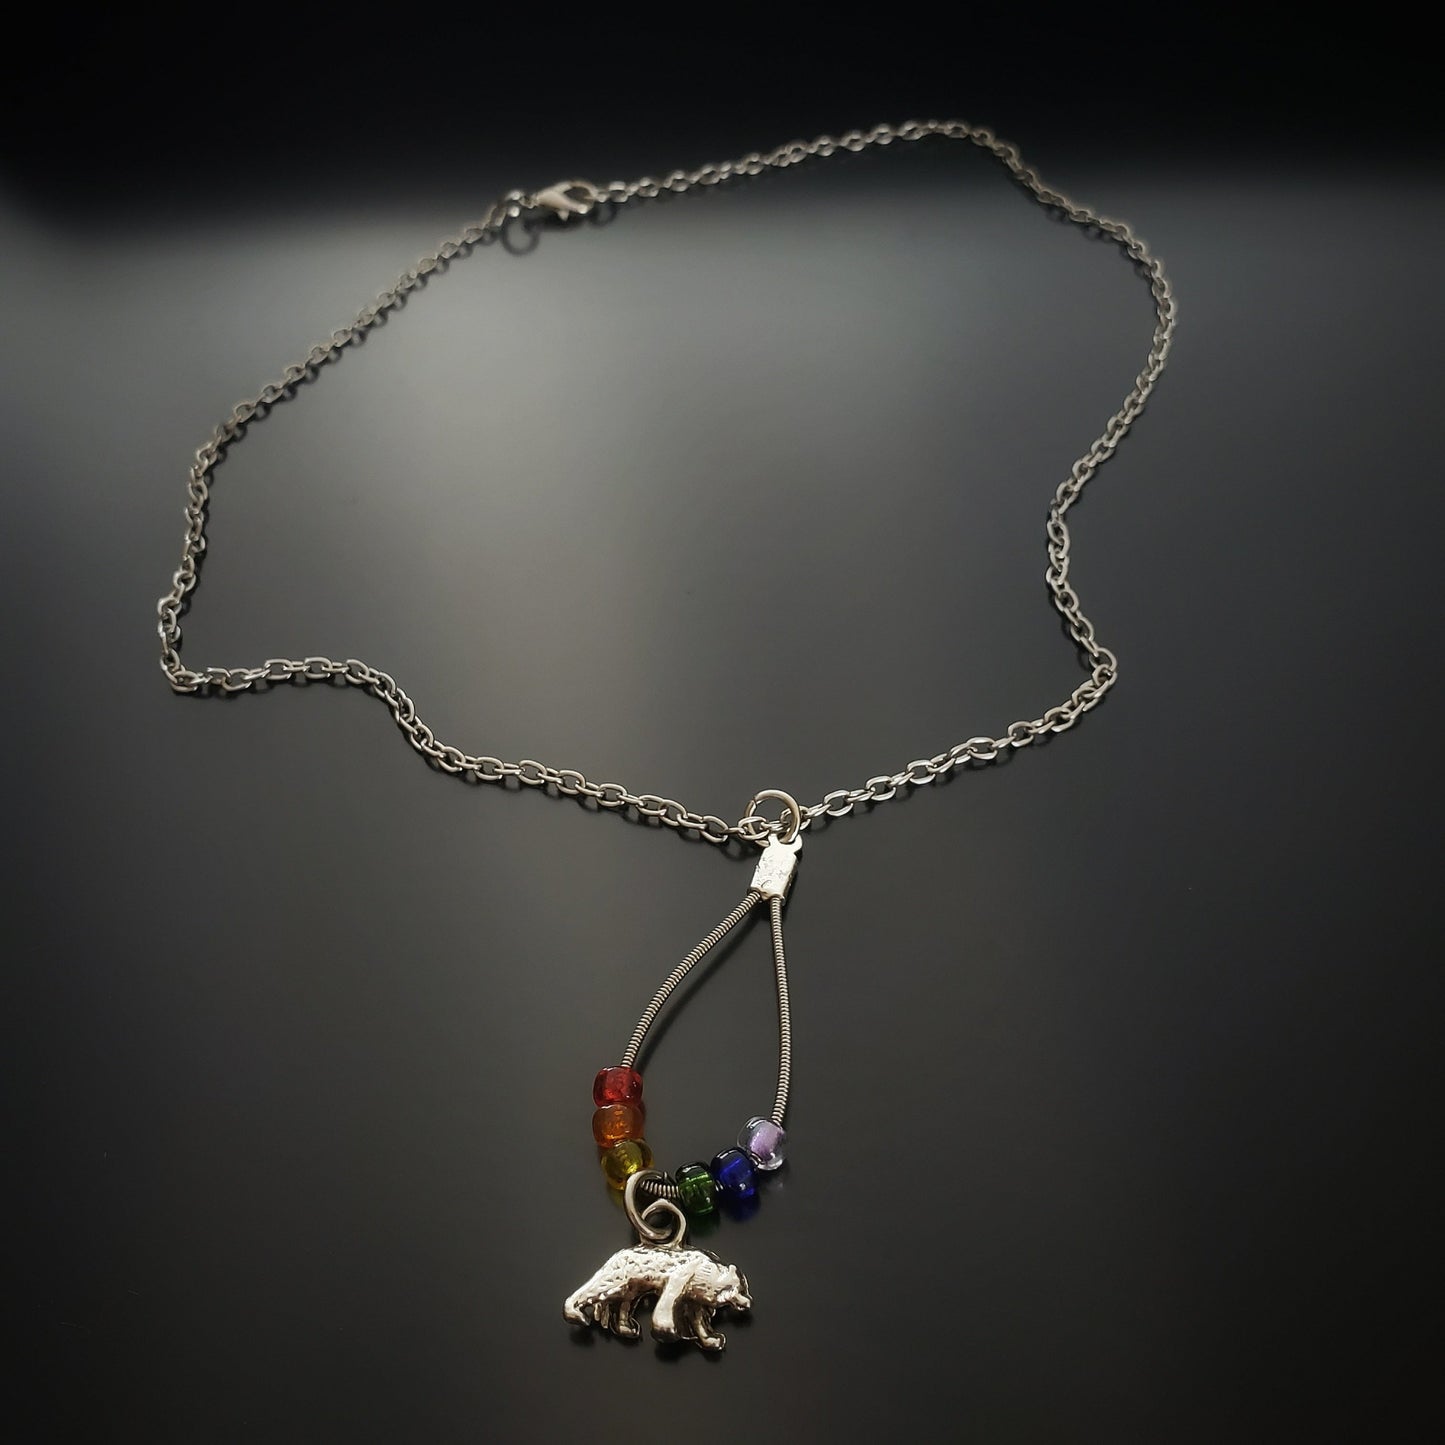 chain style necklace with a teardrop shaped pendant made from an upcycled guitar string and six glass beads representing the colours of the LGBTQ pride flag and a bear shaped silver coloured pendant